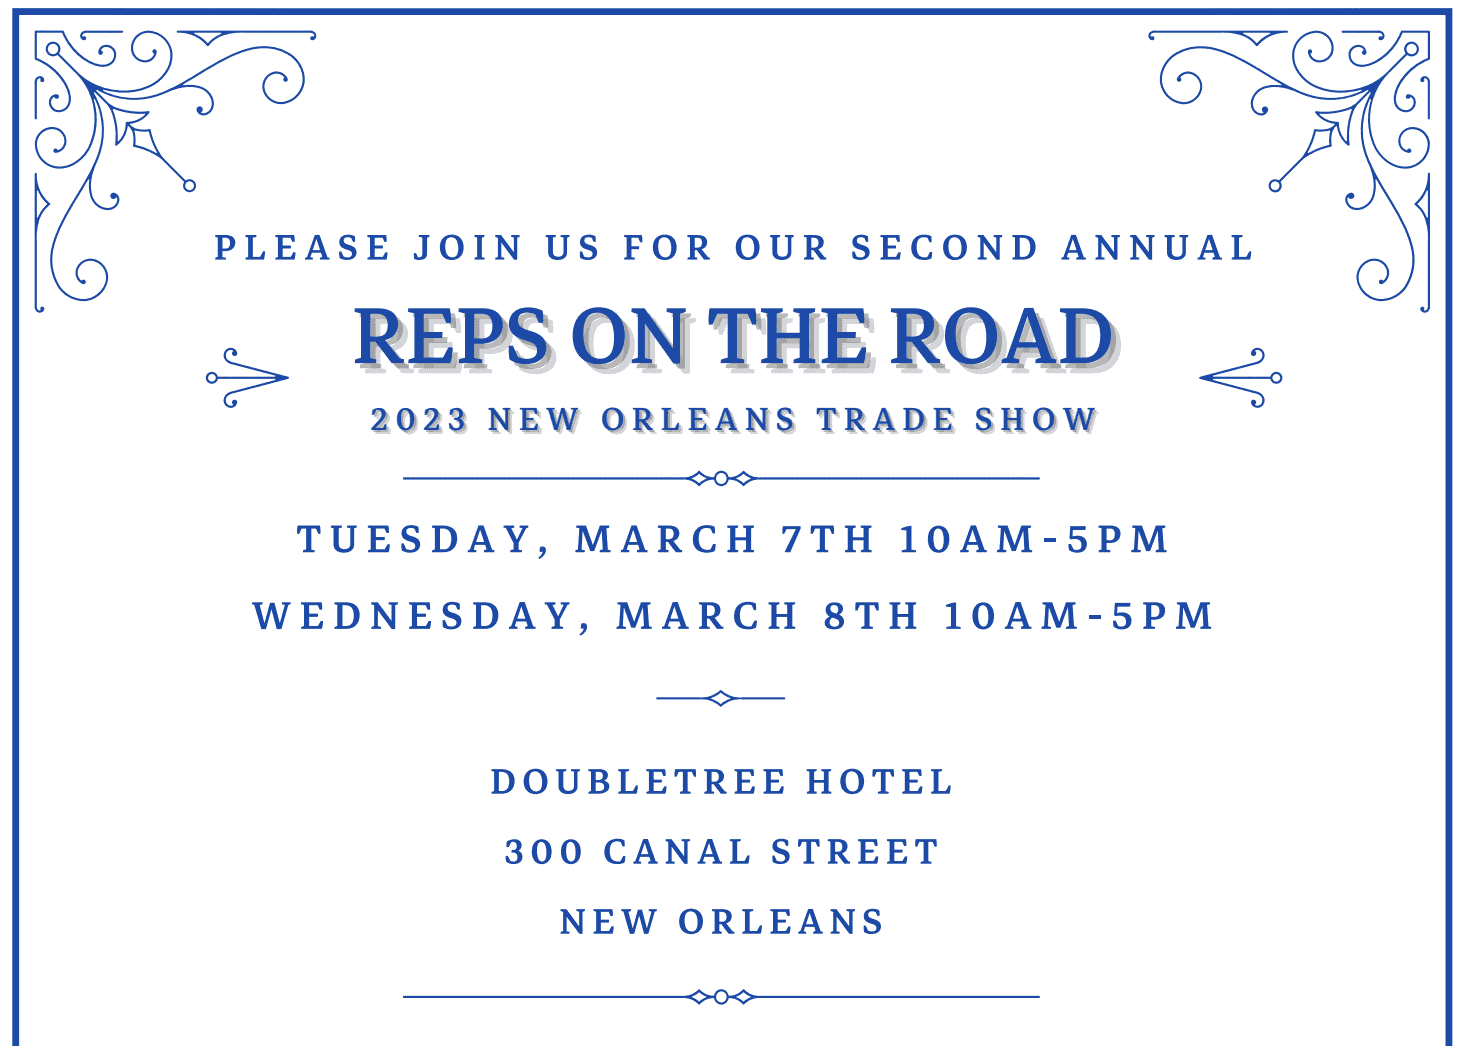 A flyer for the "Reps on the Road" trade show.